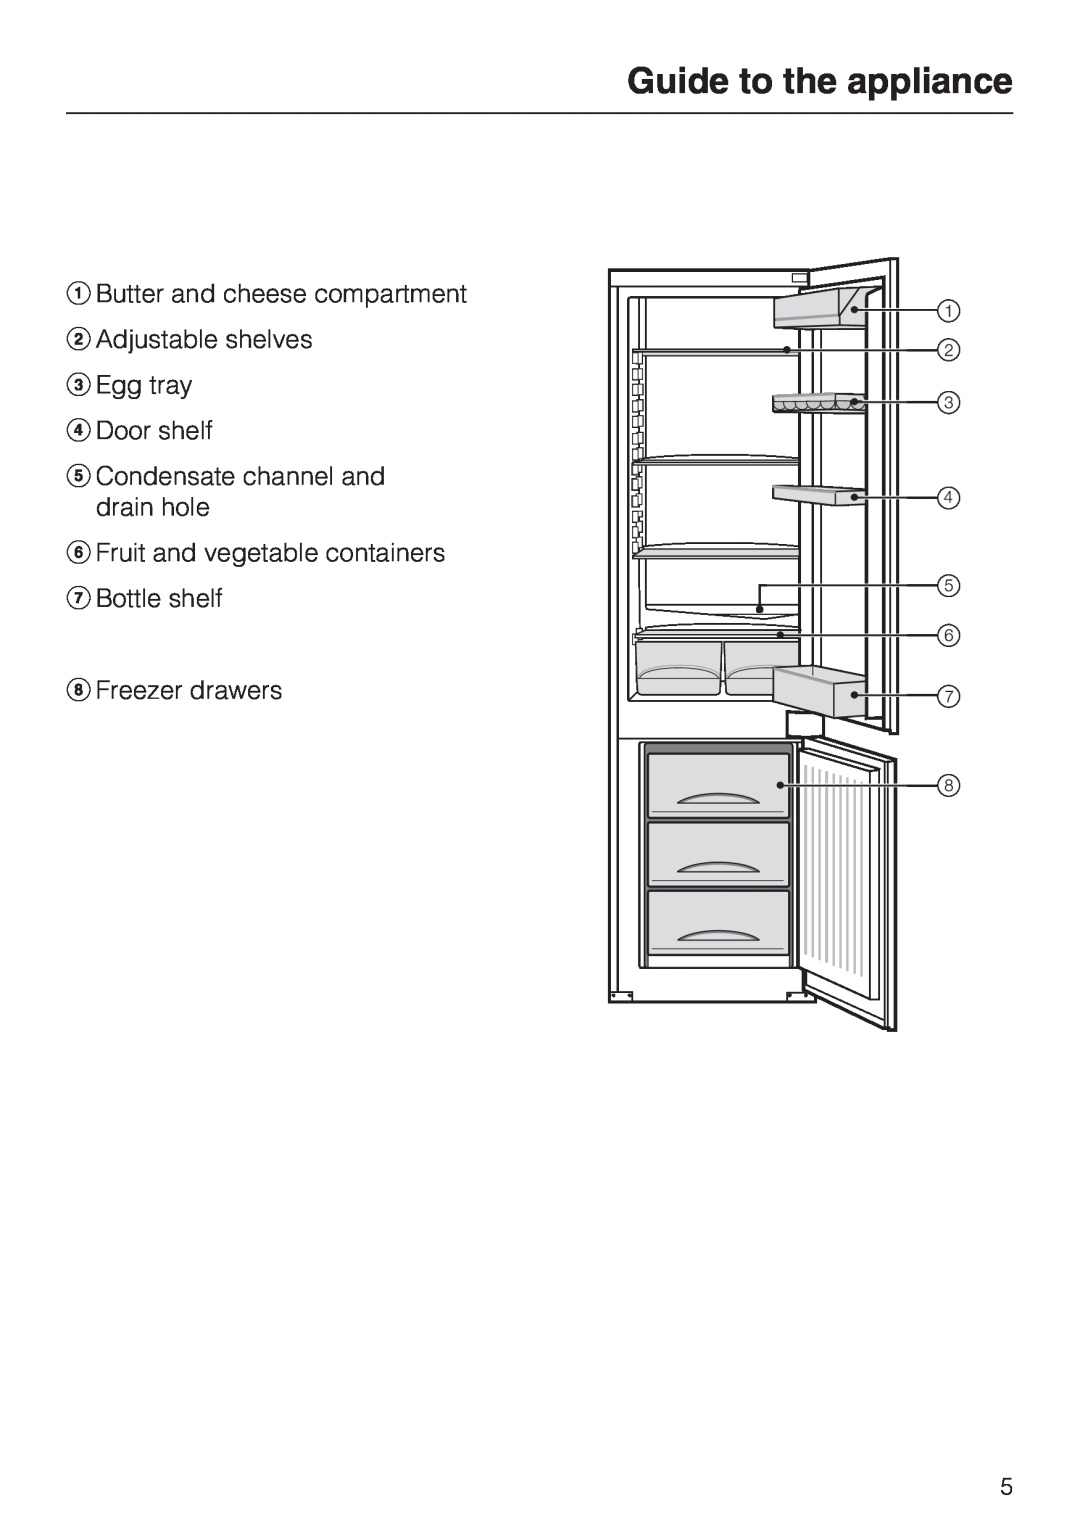 Miele KDN 12623 S-1 Guide to the appliance, Butter and cheese compartment Adjustable shelves, Egg tray Door shelf 